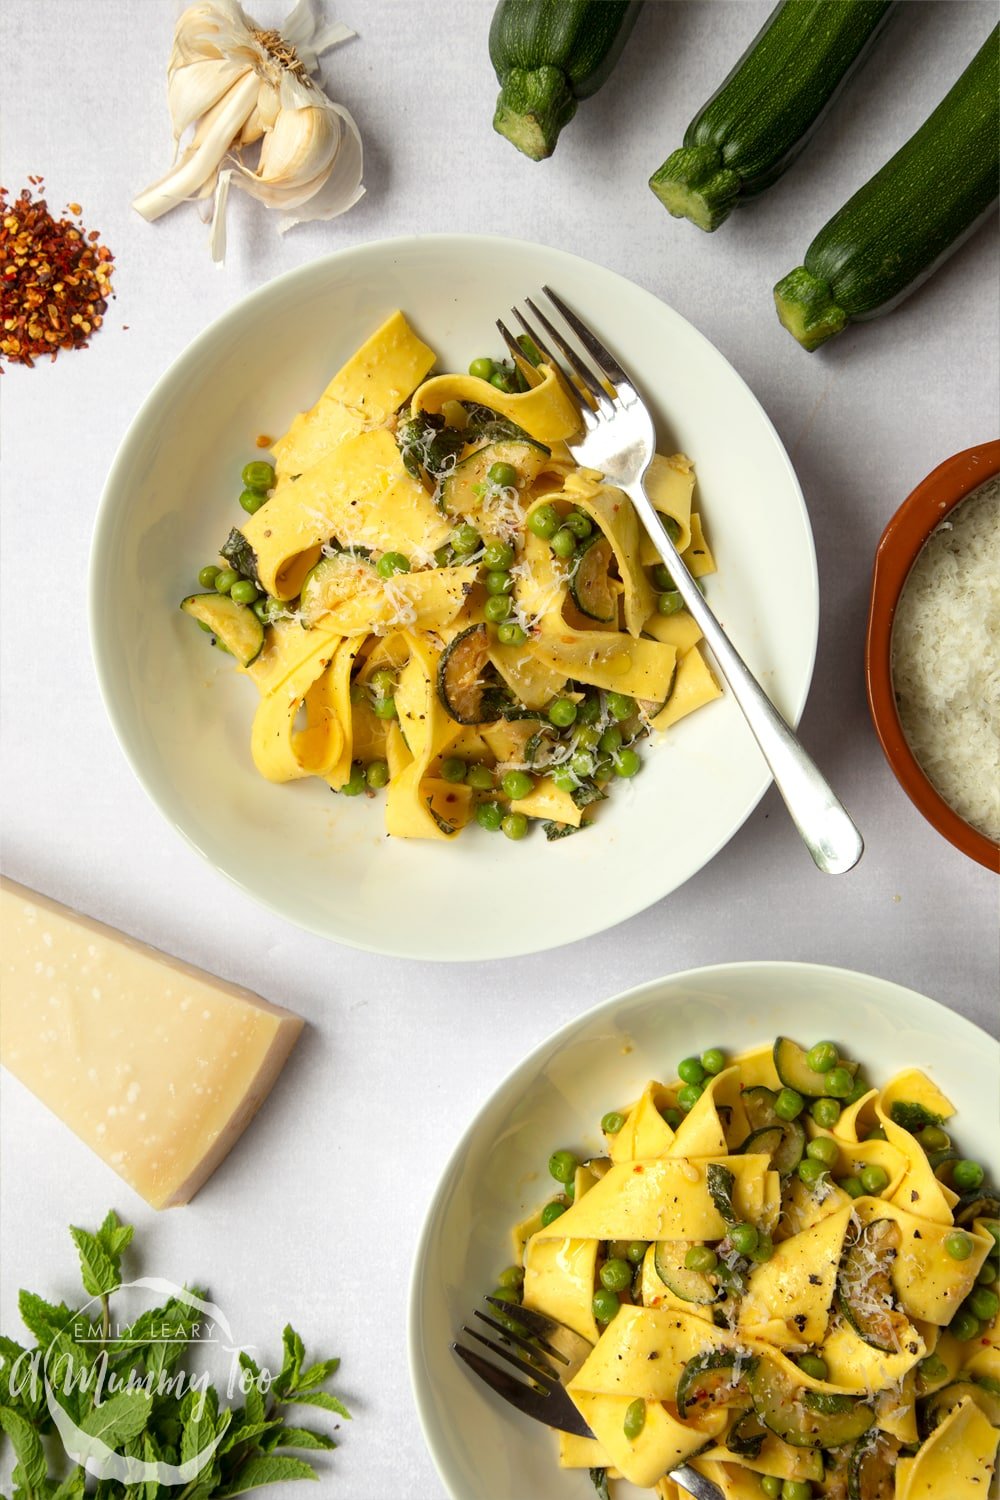 Jamie Oliver's courgette and pea pasta, served to two bowls, surrounded by ingredients.